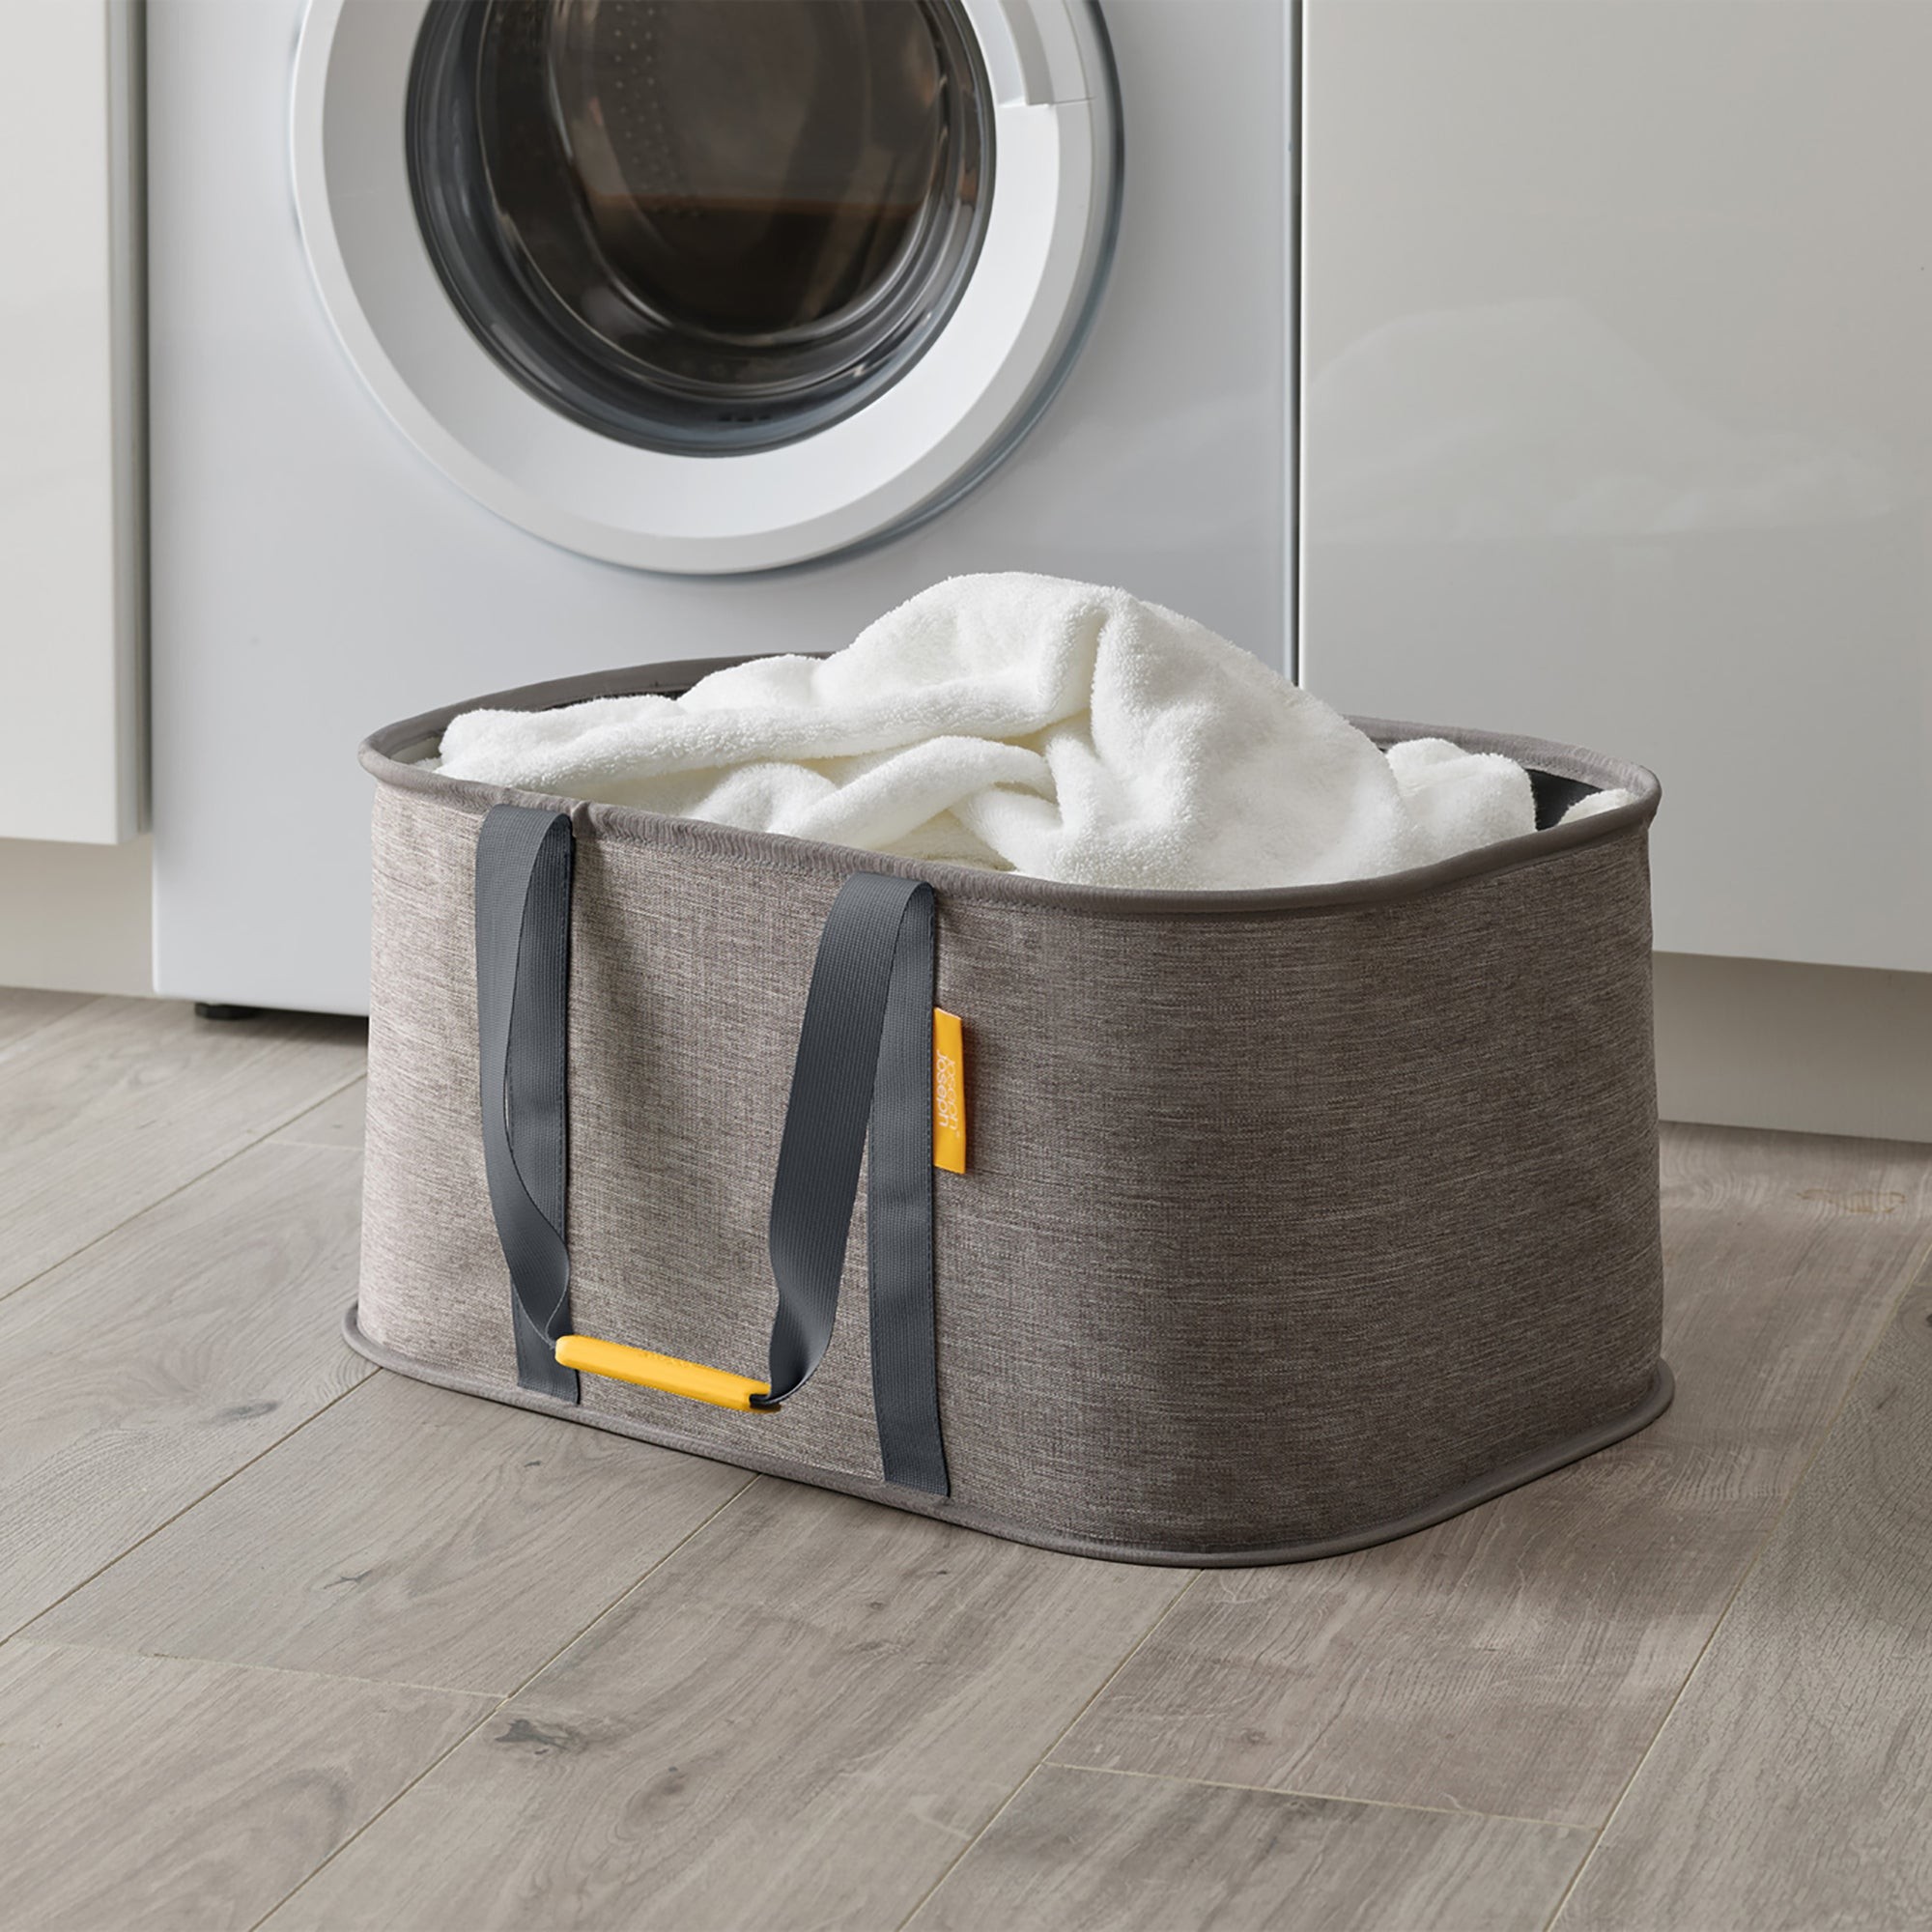 Hold-All 35L Collapsible Laundry Basket Gray